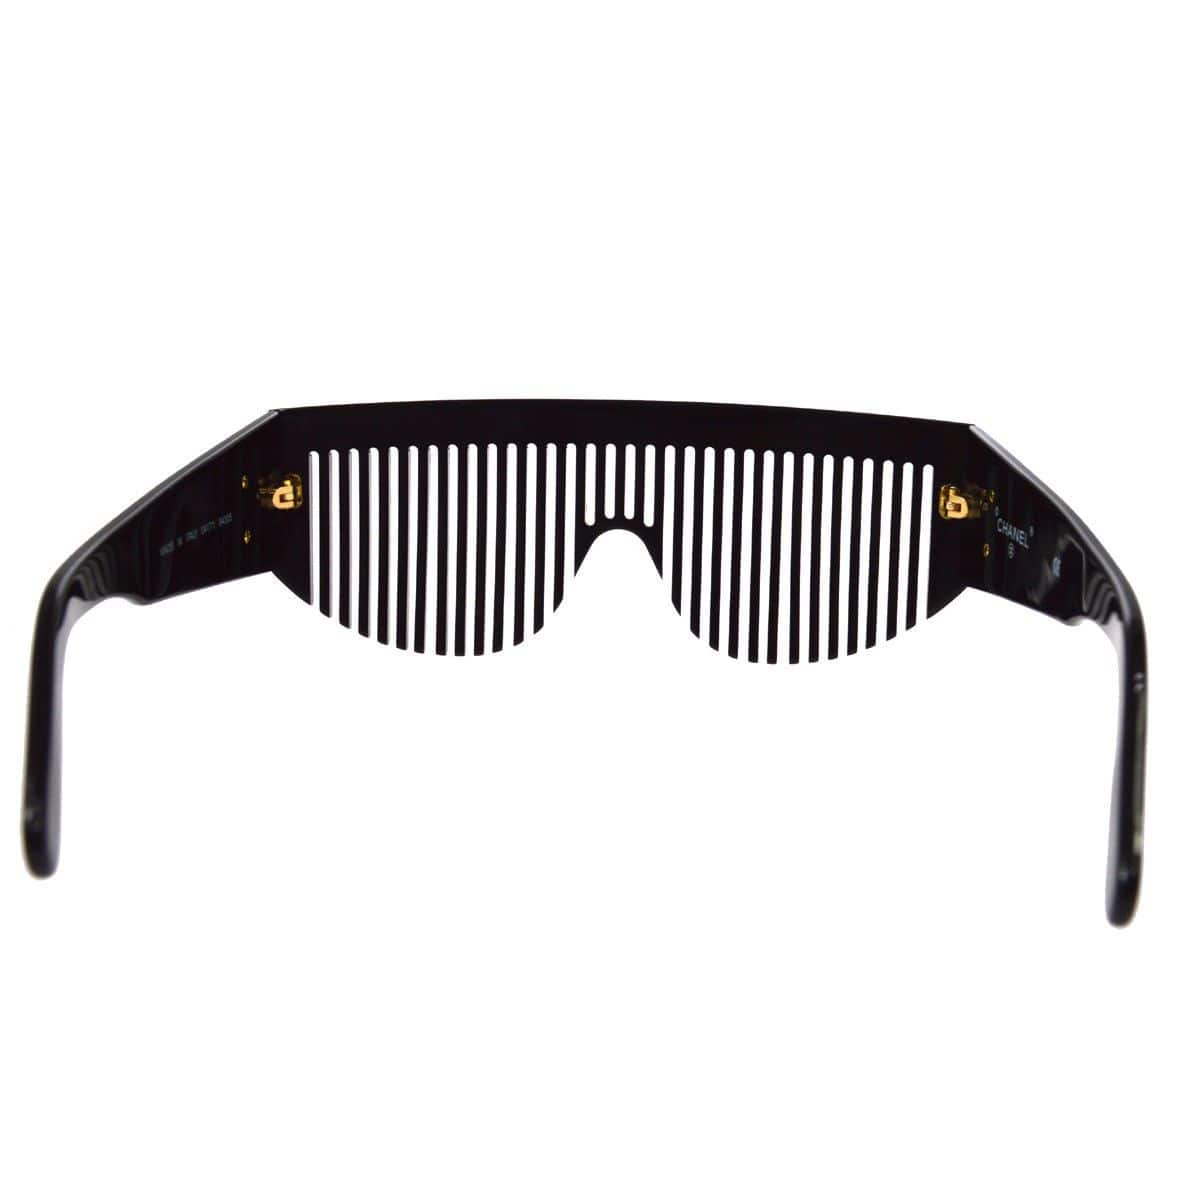 Chanel Black Vintage Runway Comb Iconic Sunglasses. Free shipping